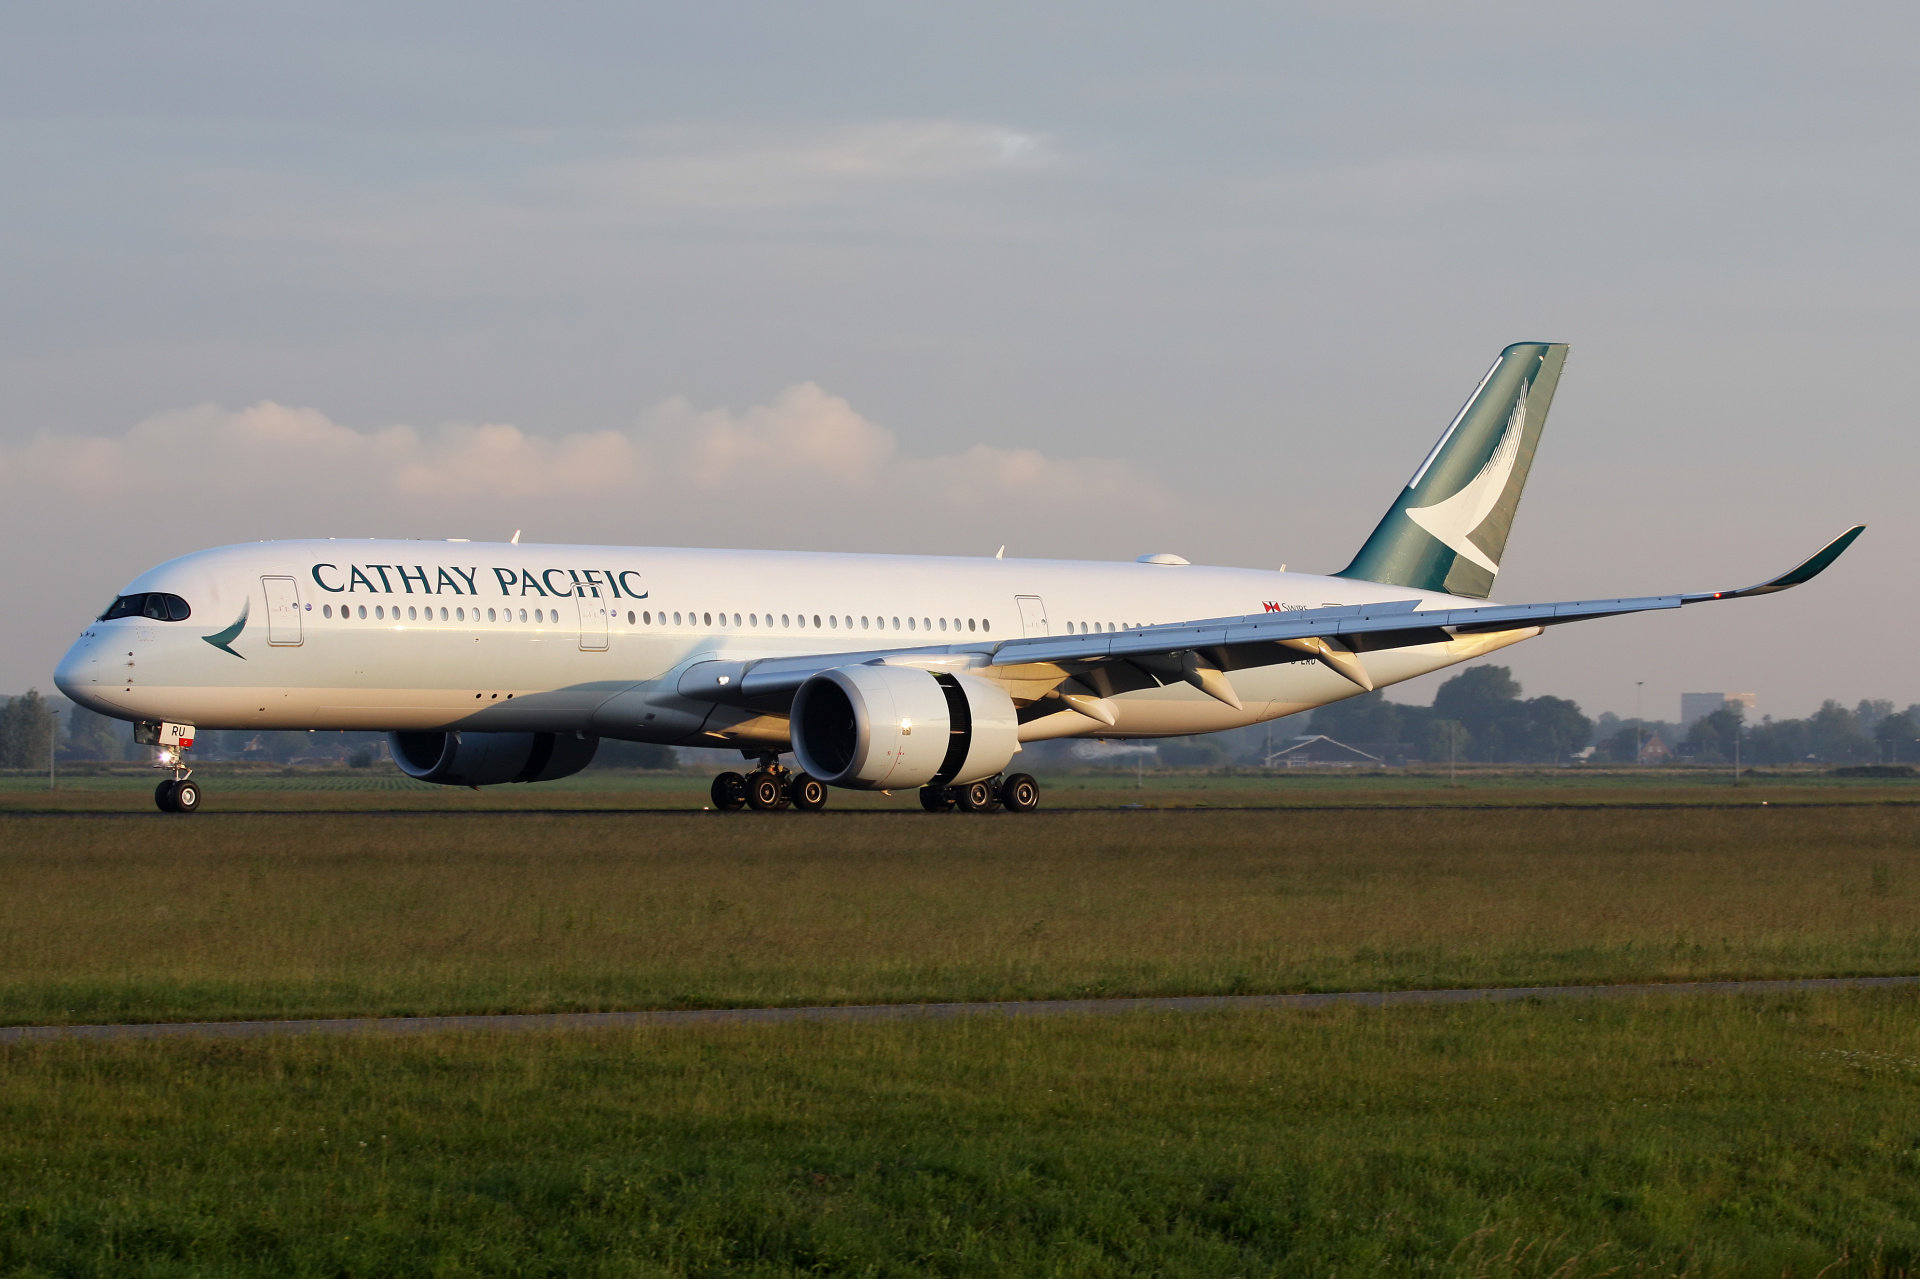 B-LRU, Cathay Pacific (Aircraft » Schiphol Spotting » Airbus A350-900)